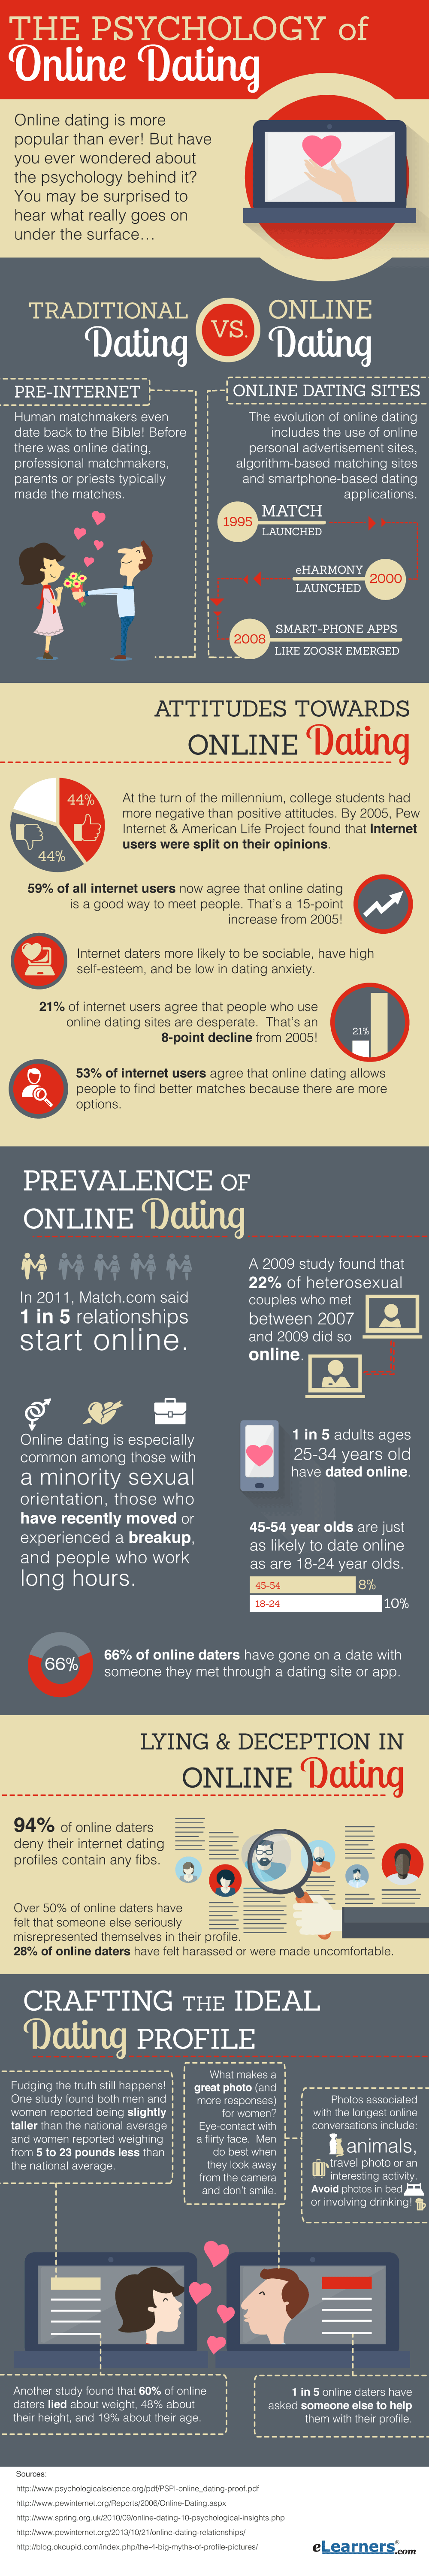 The Psychology of Online Dating